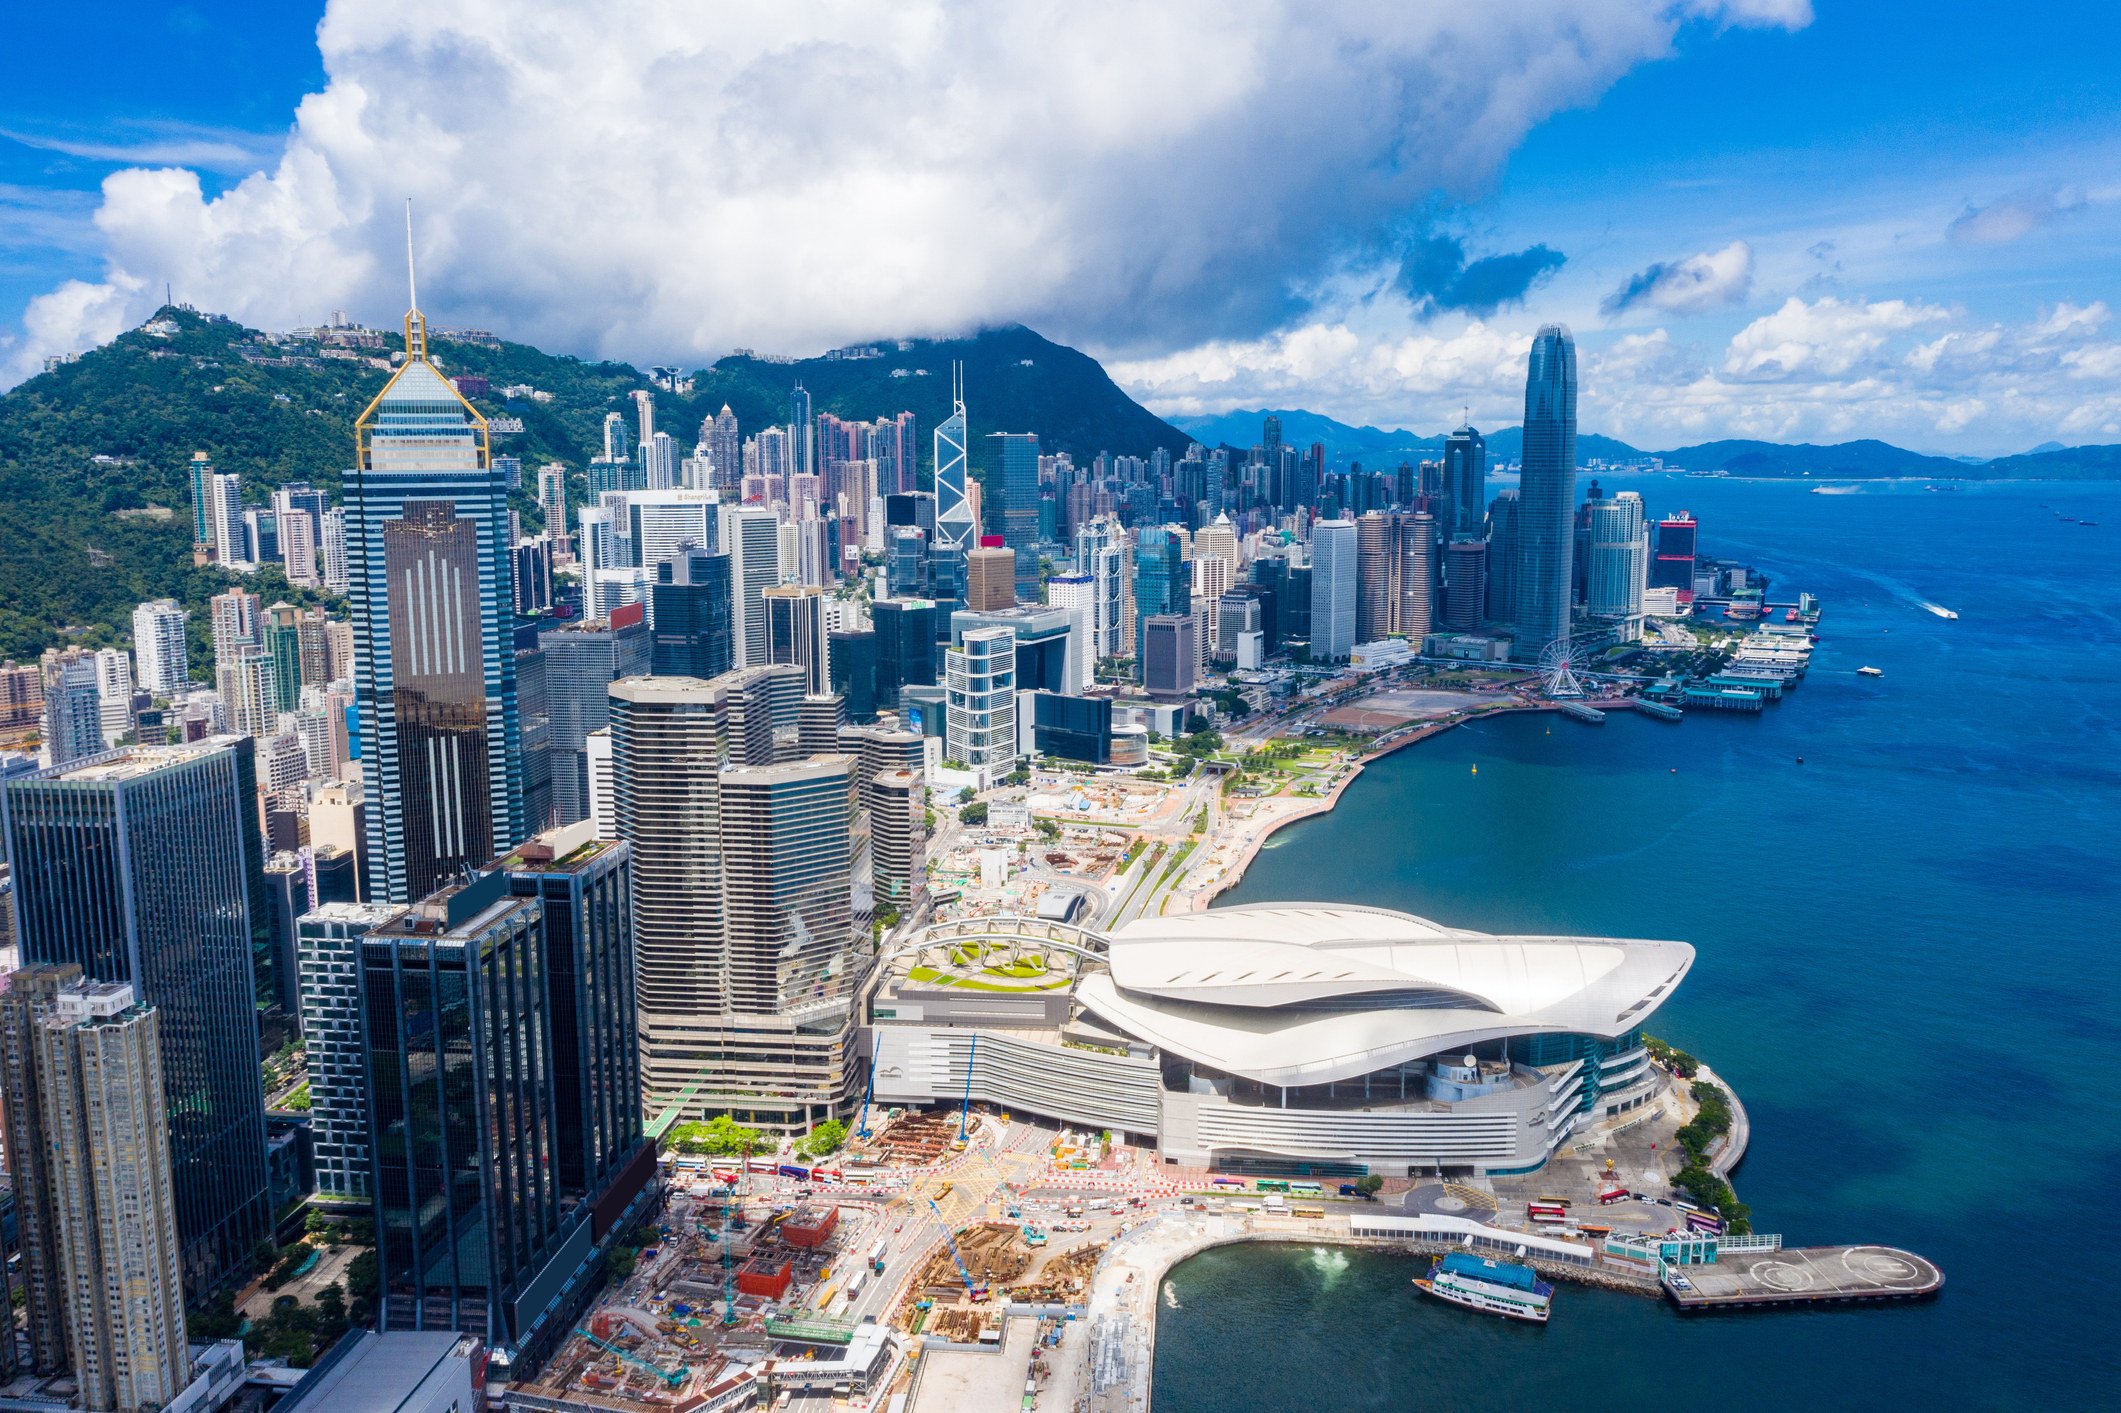 Hong Kong must understand and adapt to the requirements and demands of those with whom we seek to connect in this constantly changing environment. Photo: Shutterstock